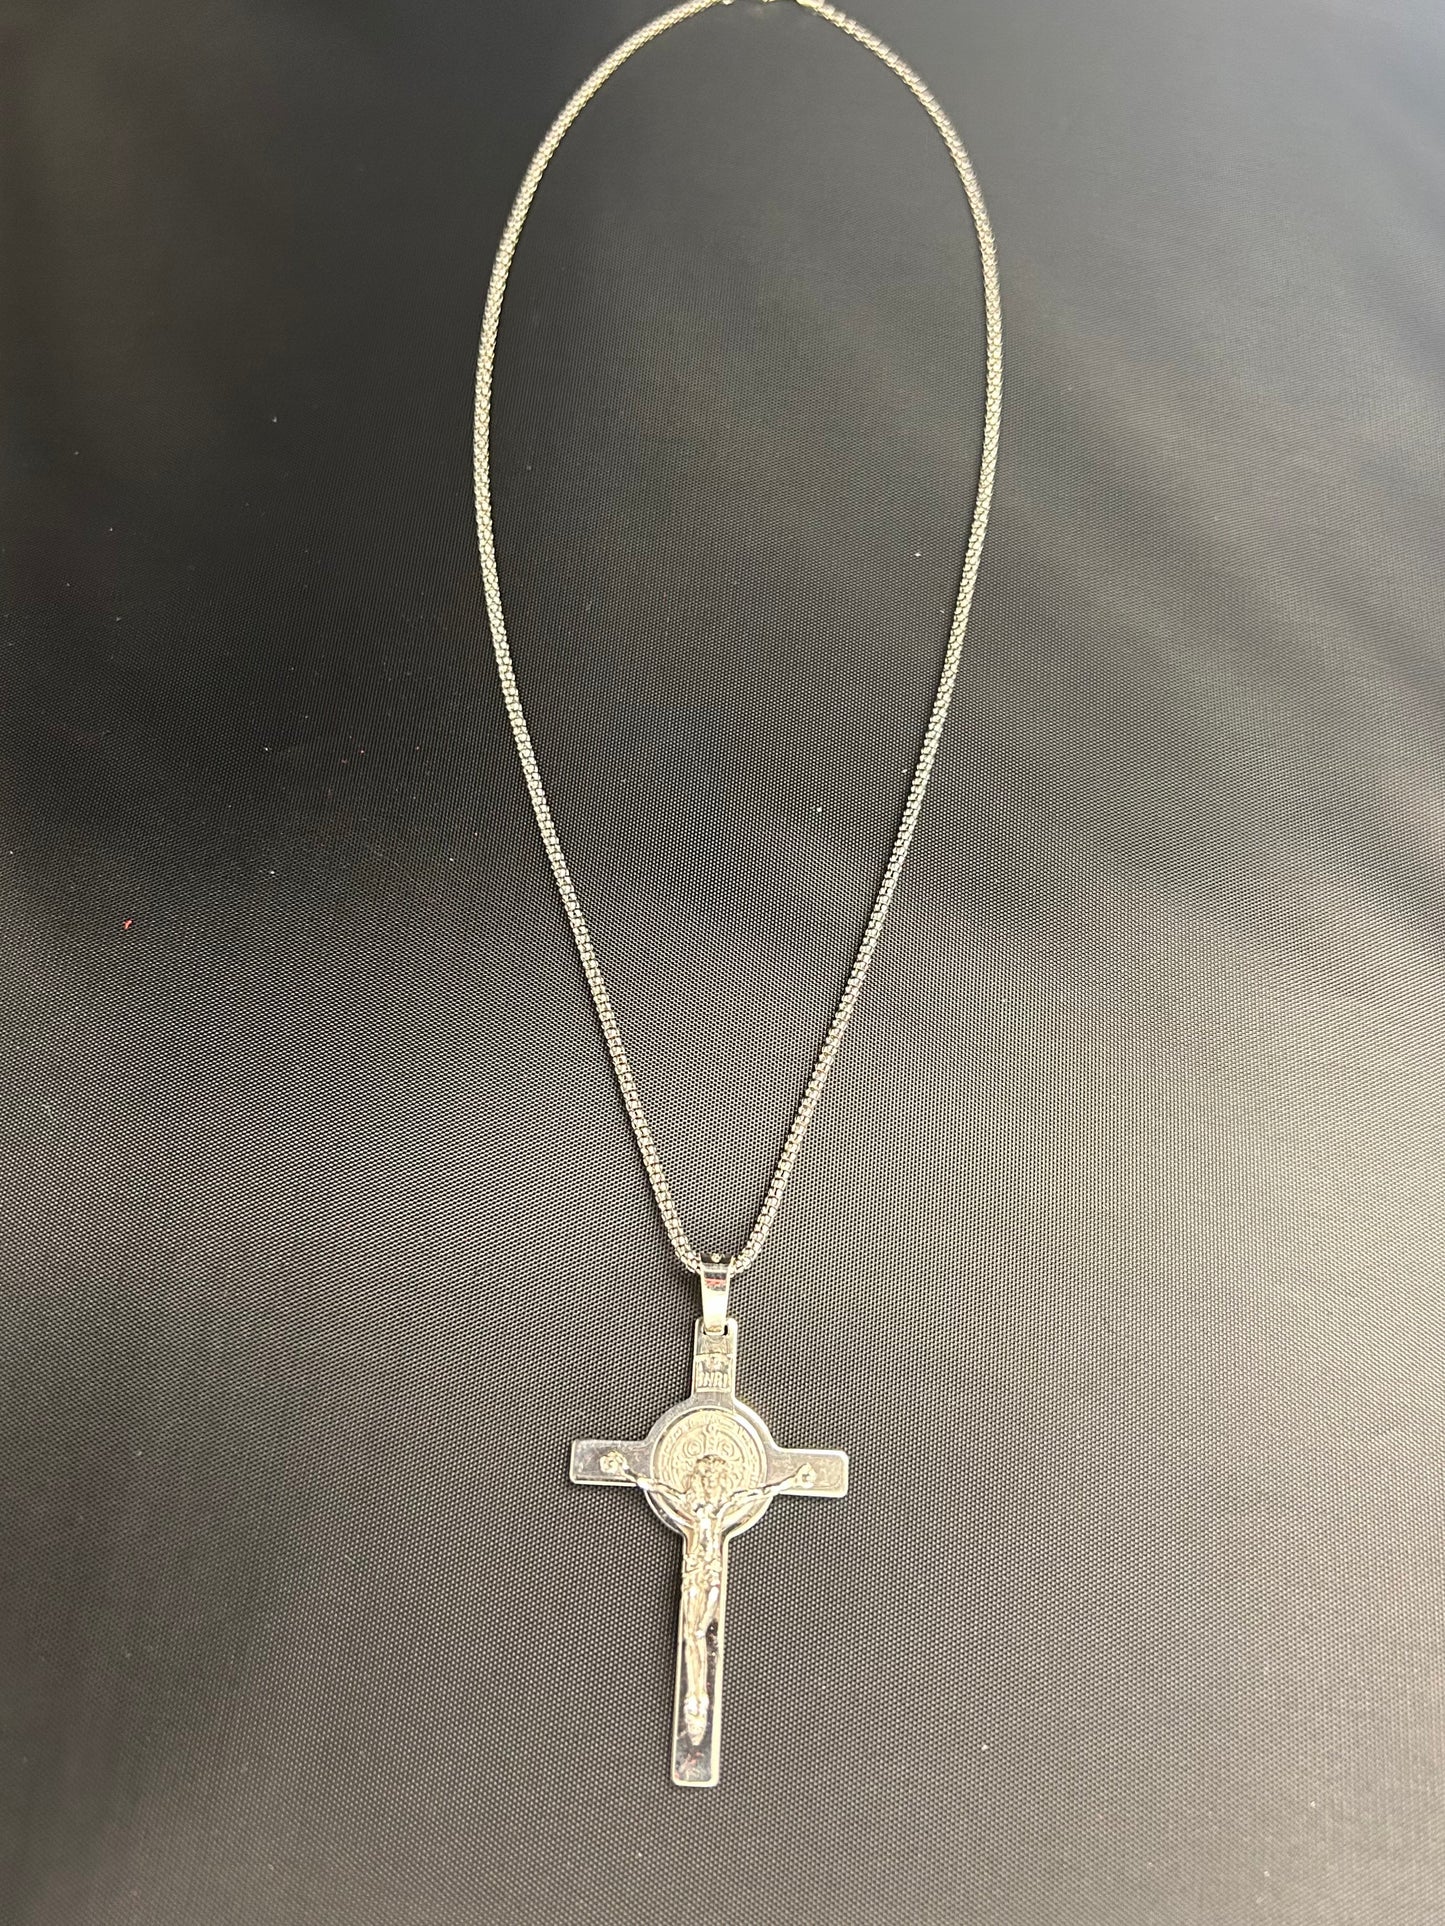 Large Solid Sterling Silver St. Benedict Crucifix with a Chain